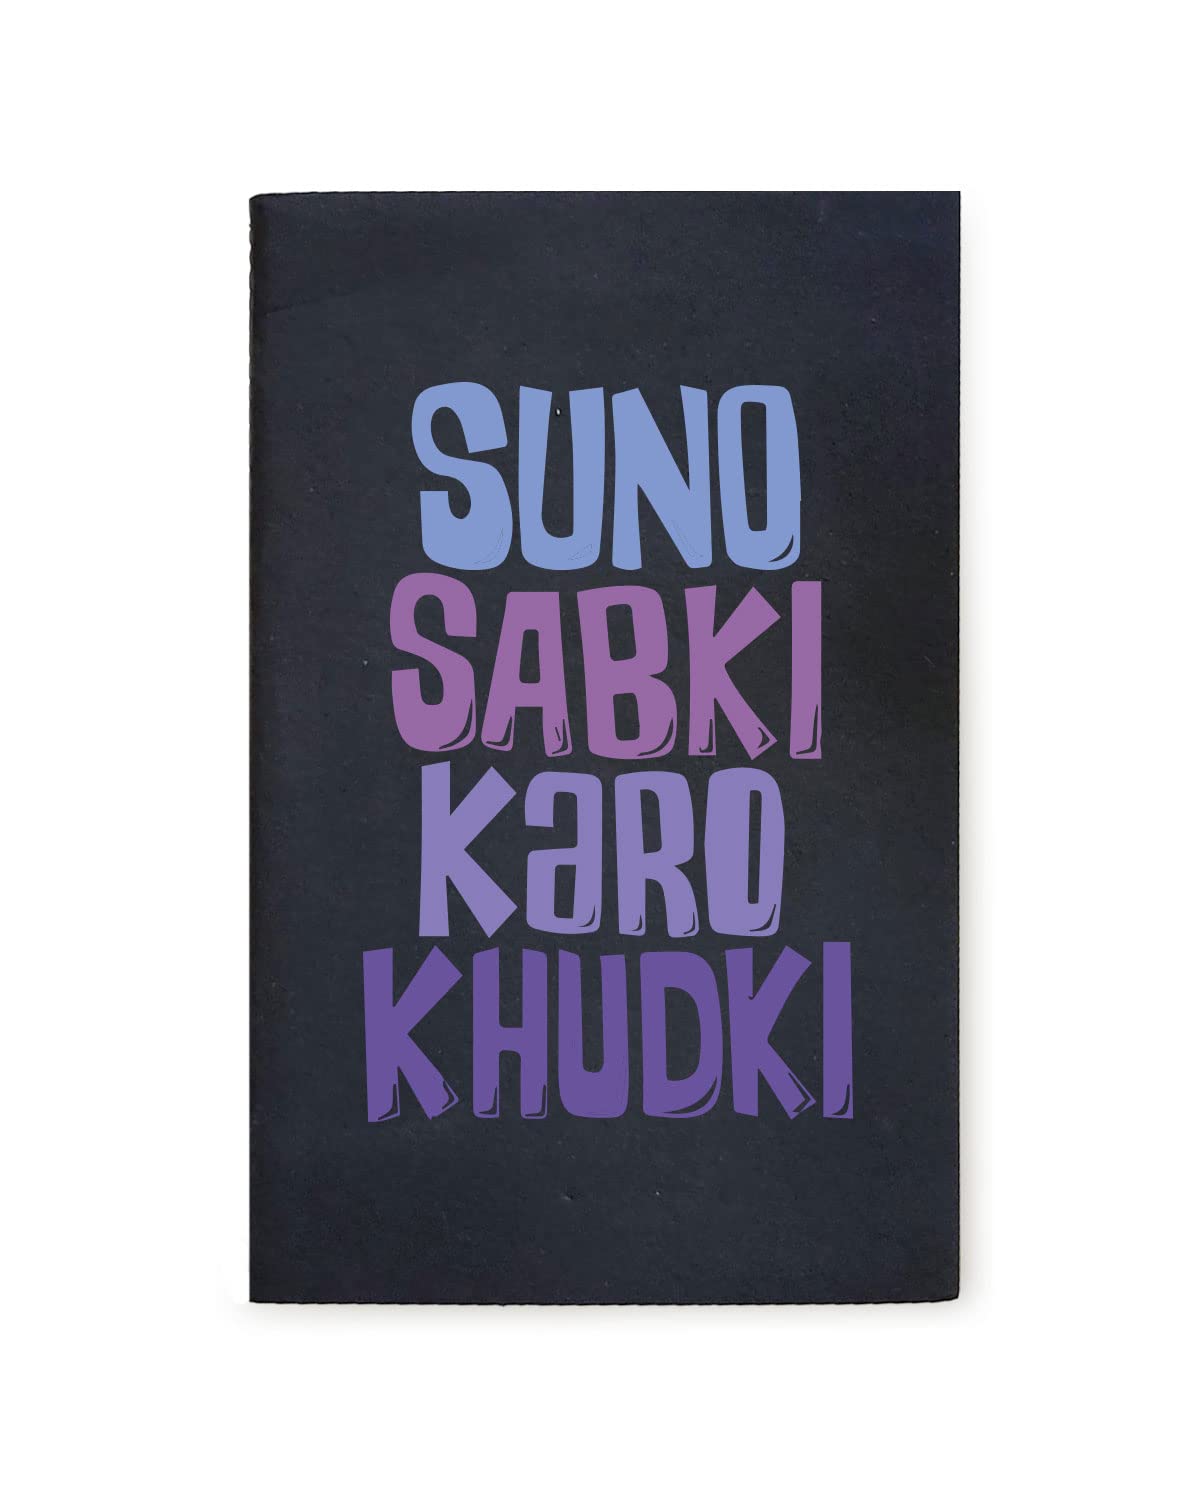 Suno Sabki Karo Khudki - Black A5 Doodle Notebook - Kraft Cover Notebook - A5 - 300 GSM Kraft Cover - Handmade - Unruled - 80 Pages - Natural Shade Pages 120 GSM - Funny Quotes & Quirky, Funky designs